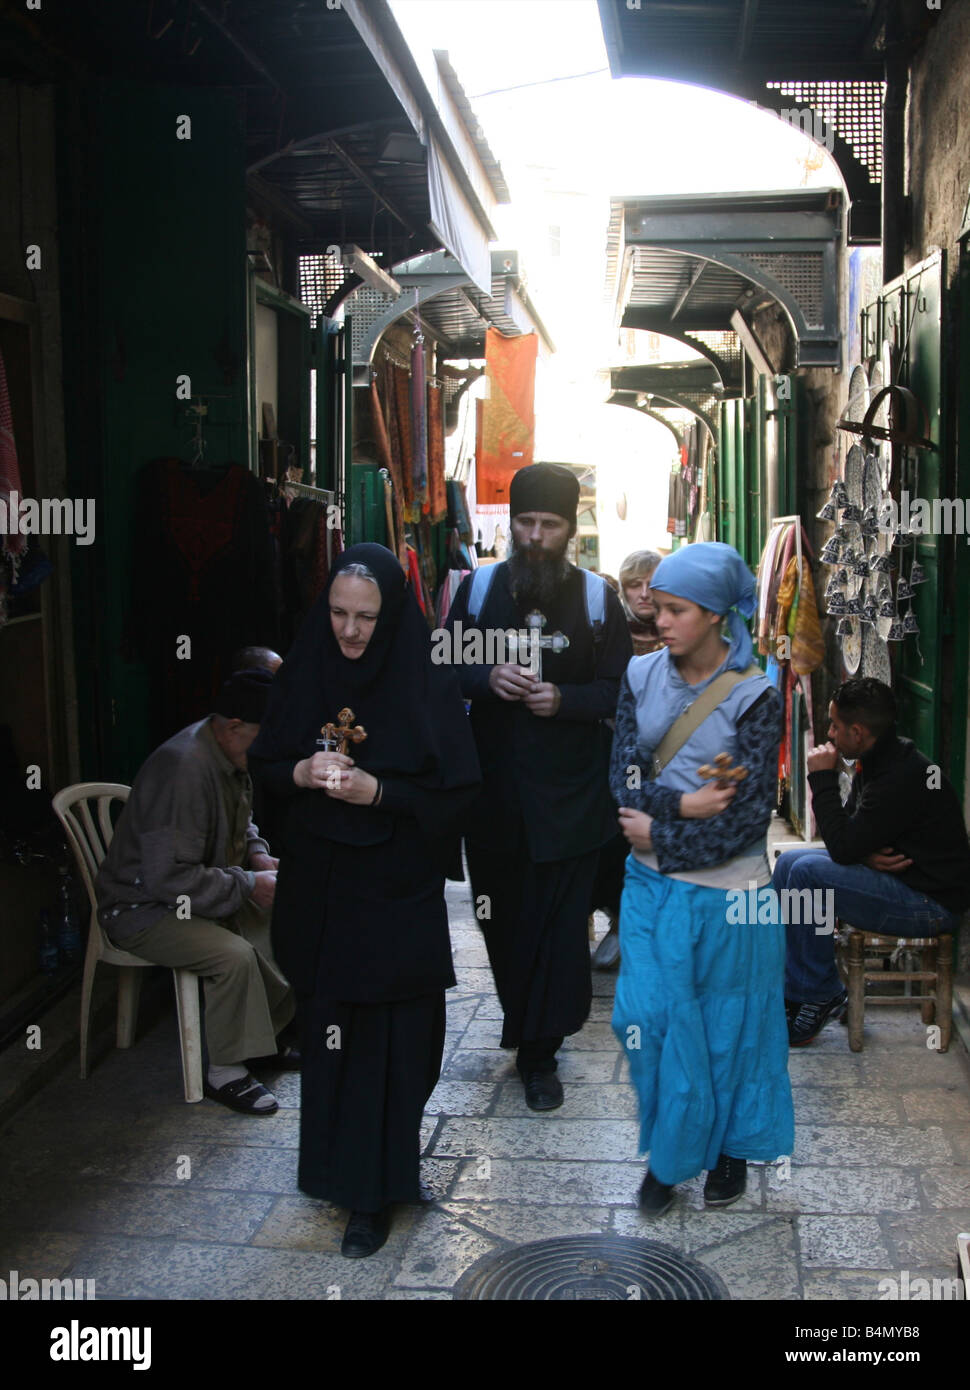 A group holding crosses walks through a market in the old city section of Jerusalem Stock Photo